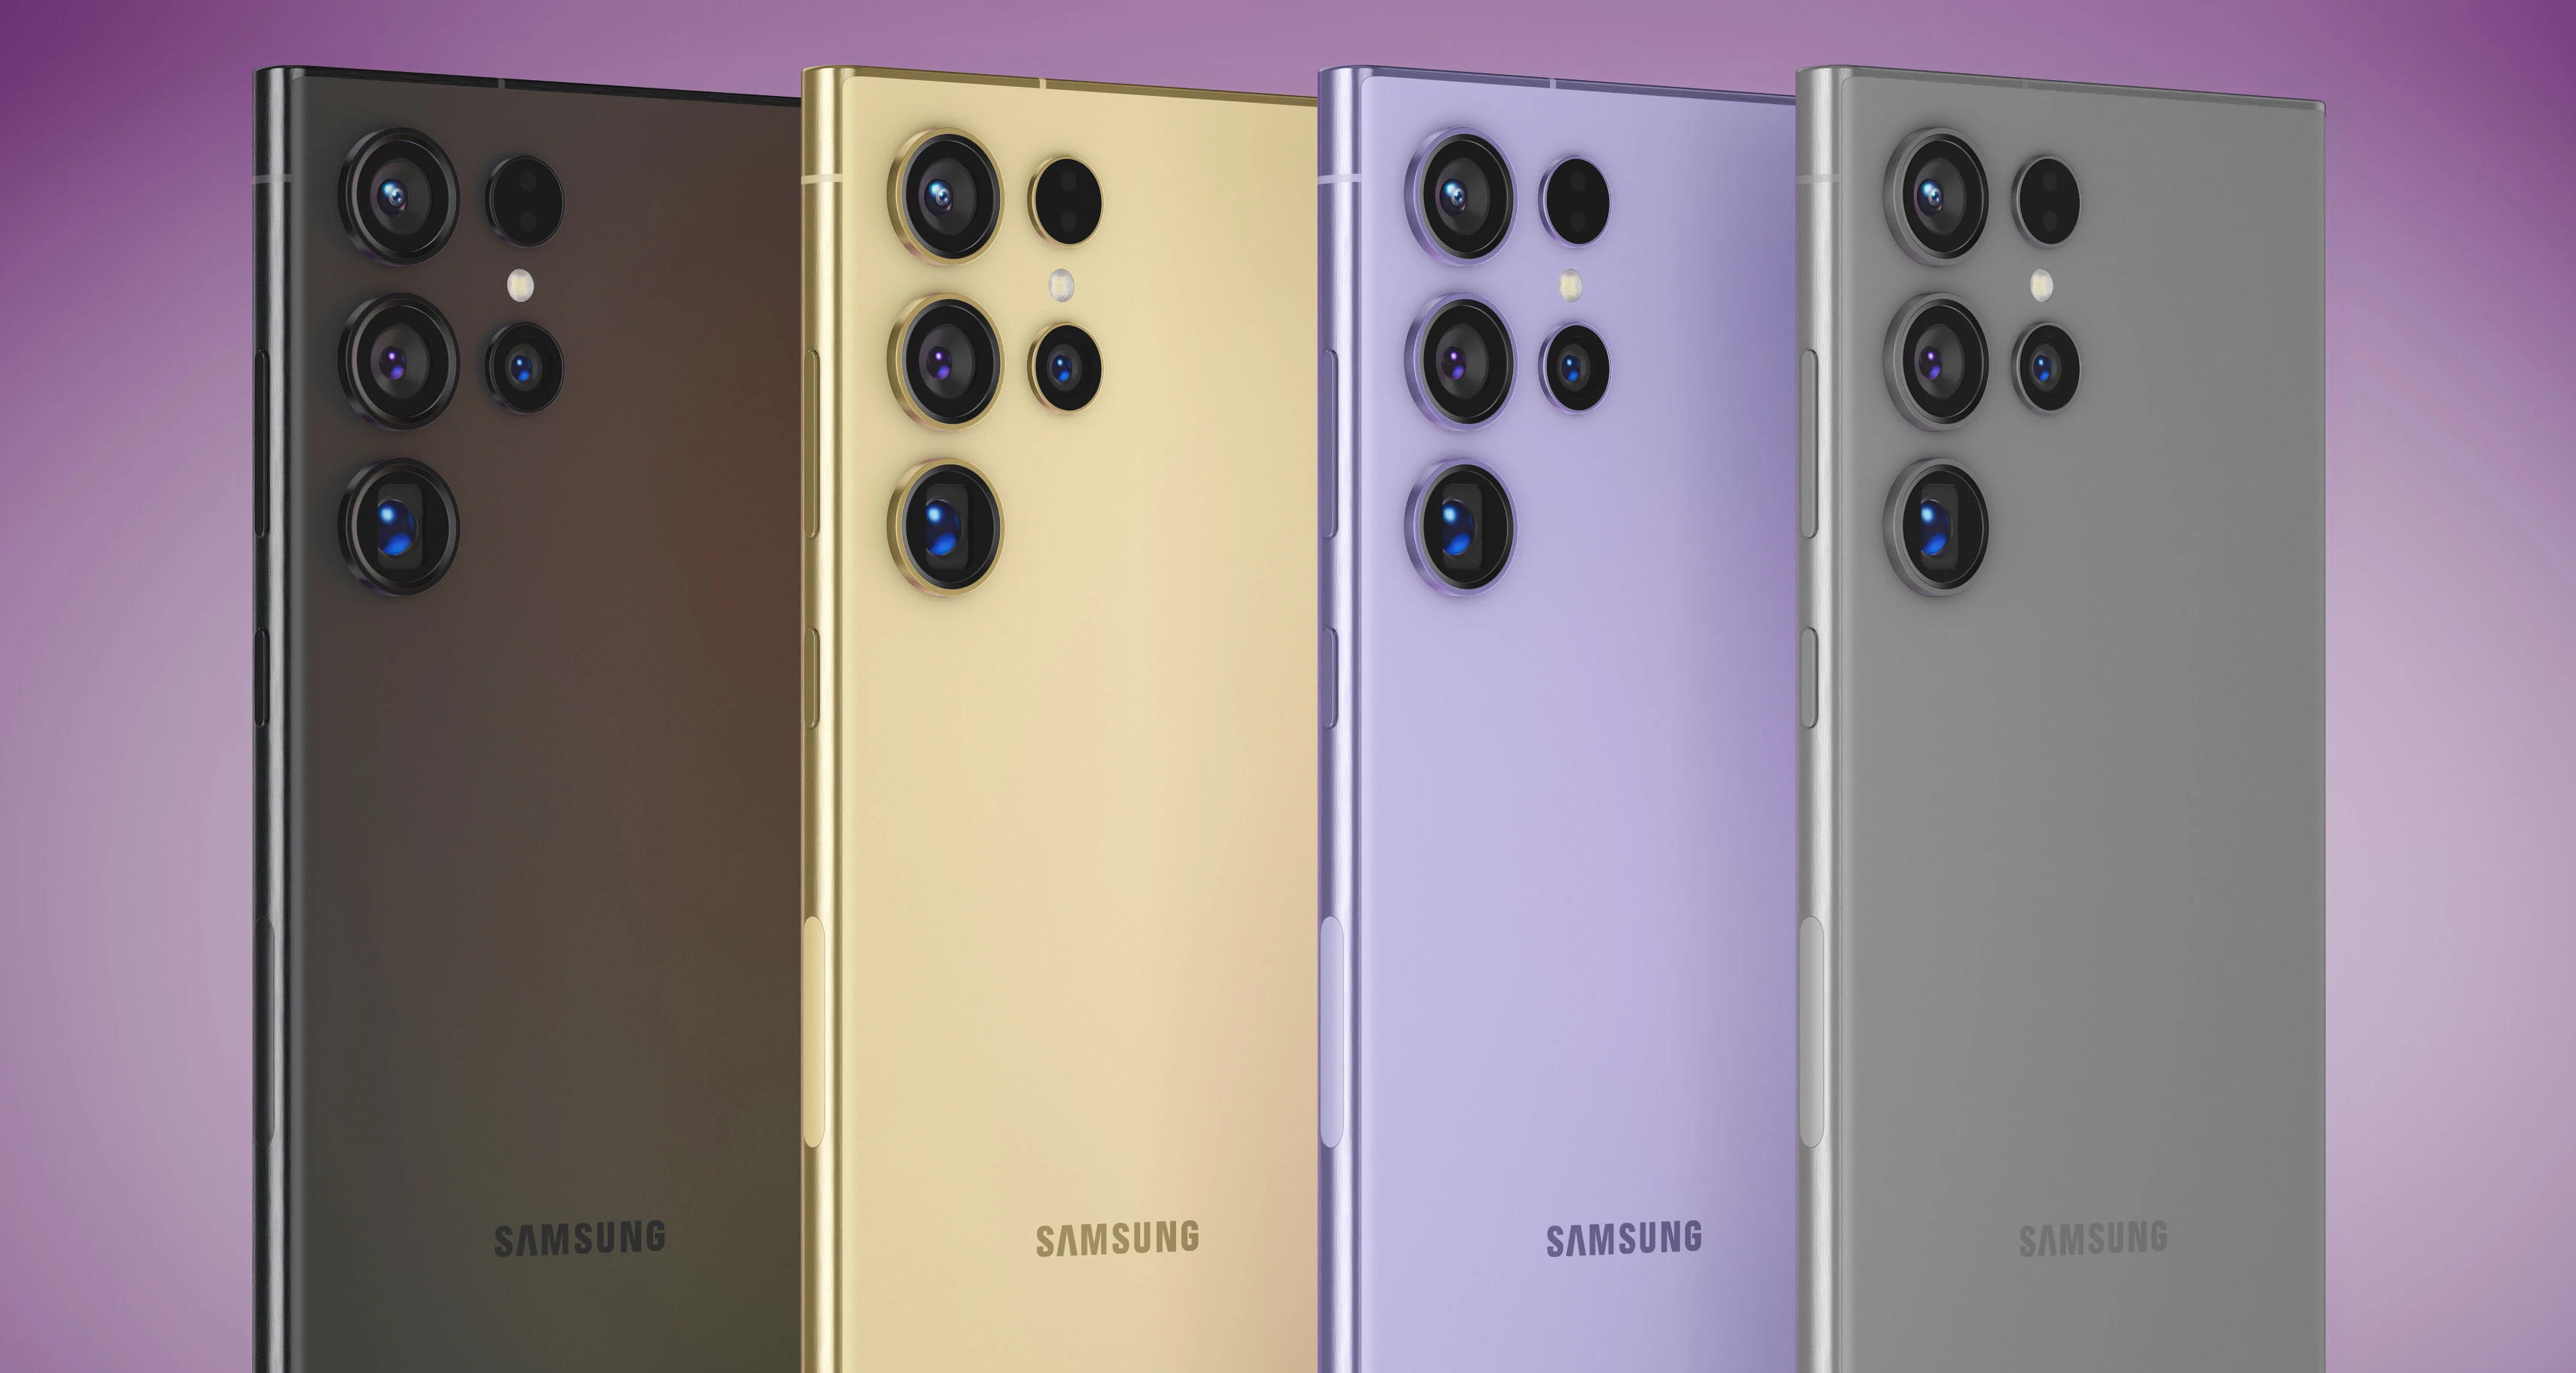 Check out all the Galaxy Z Fold 3 colors in these leaked images! - SamMobile